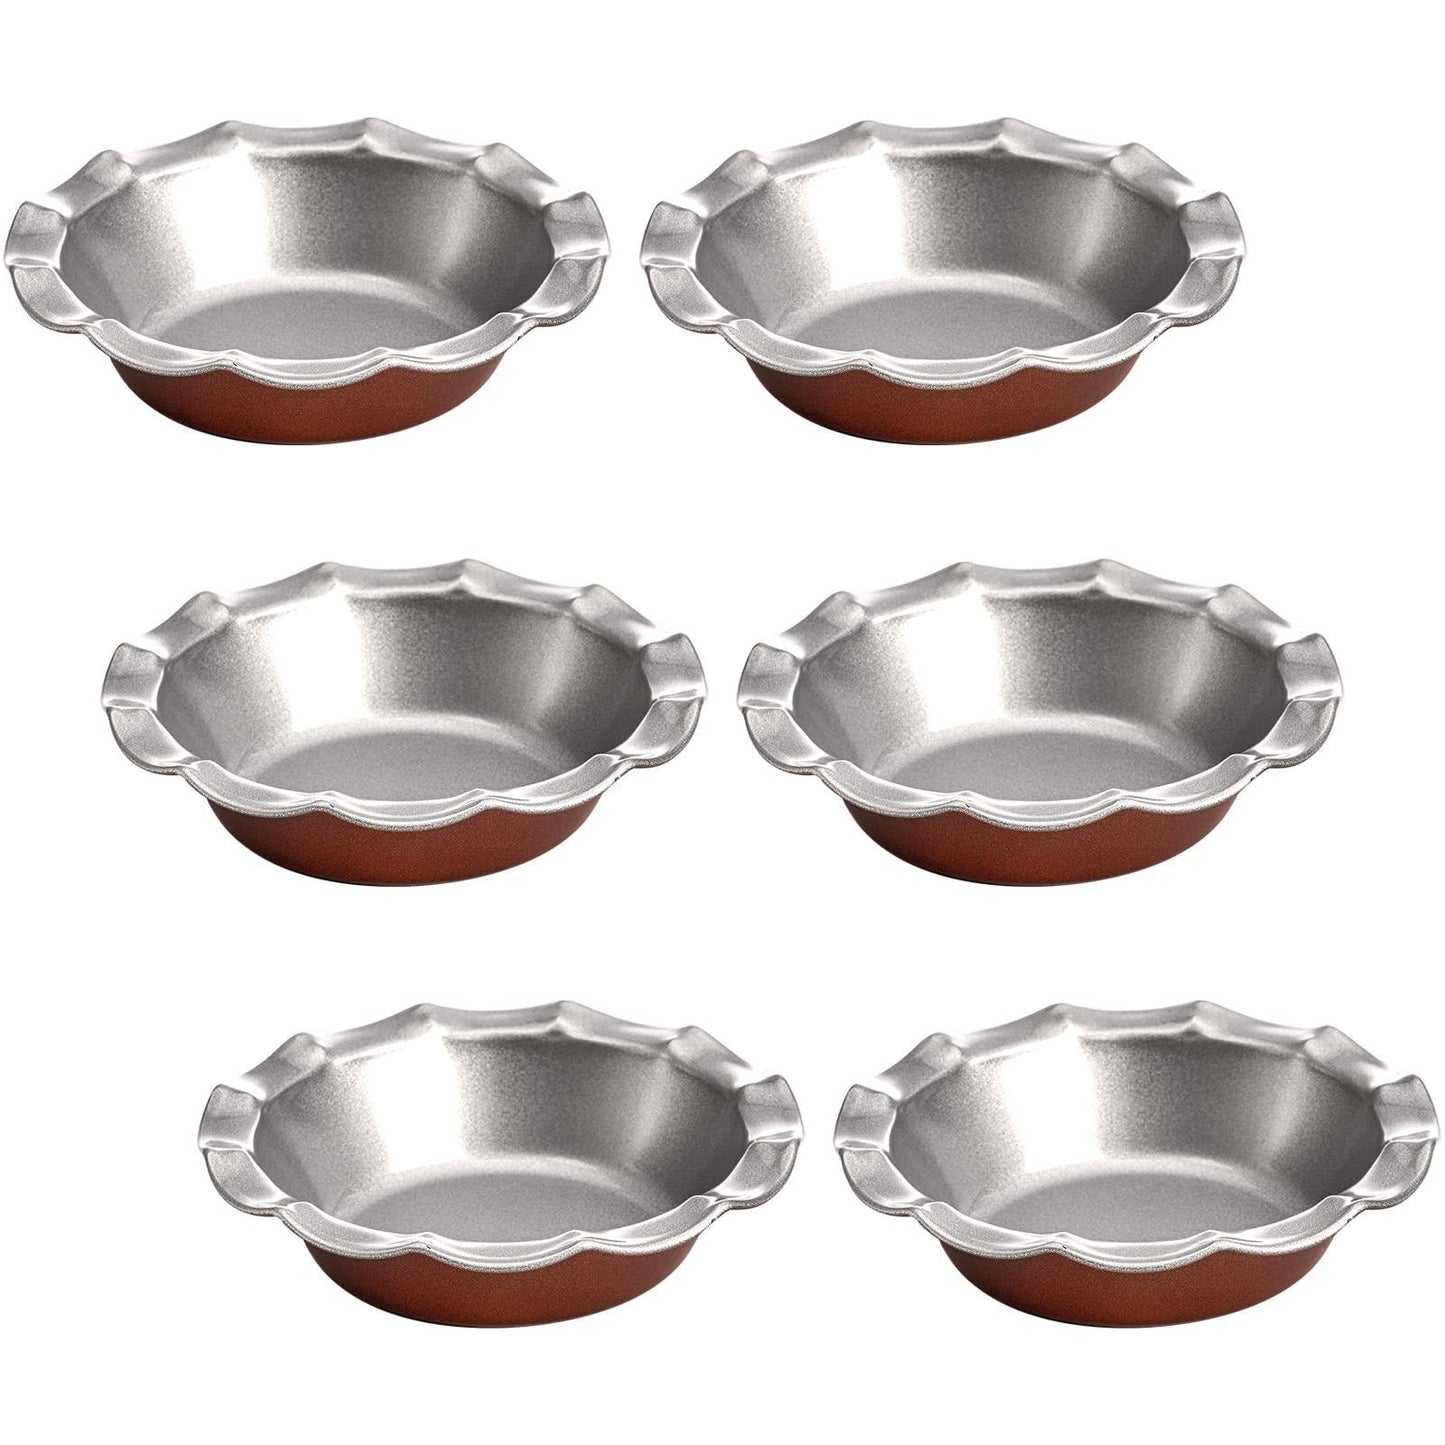 Tosnail 6 Pack 5" Mini Fluted Tart Pan, Pie Pan, Small Pie Tart Mold, Nonstick Quiche Pan for Baking - CookCave